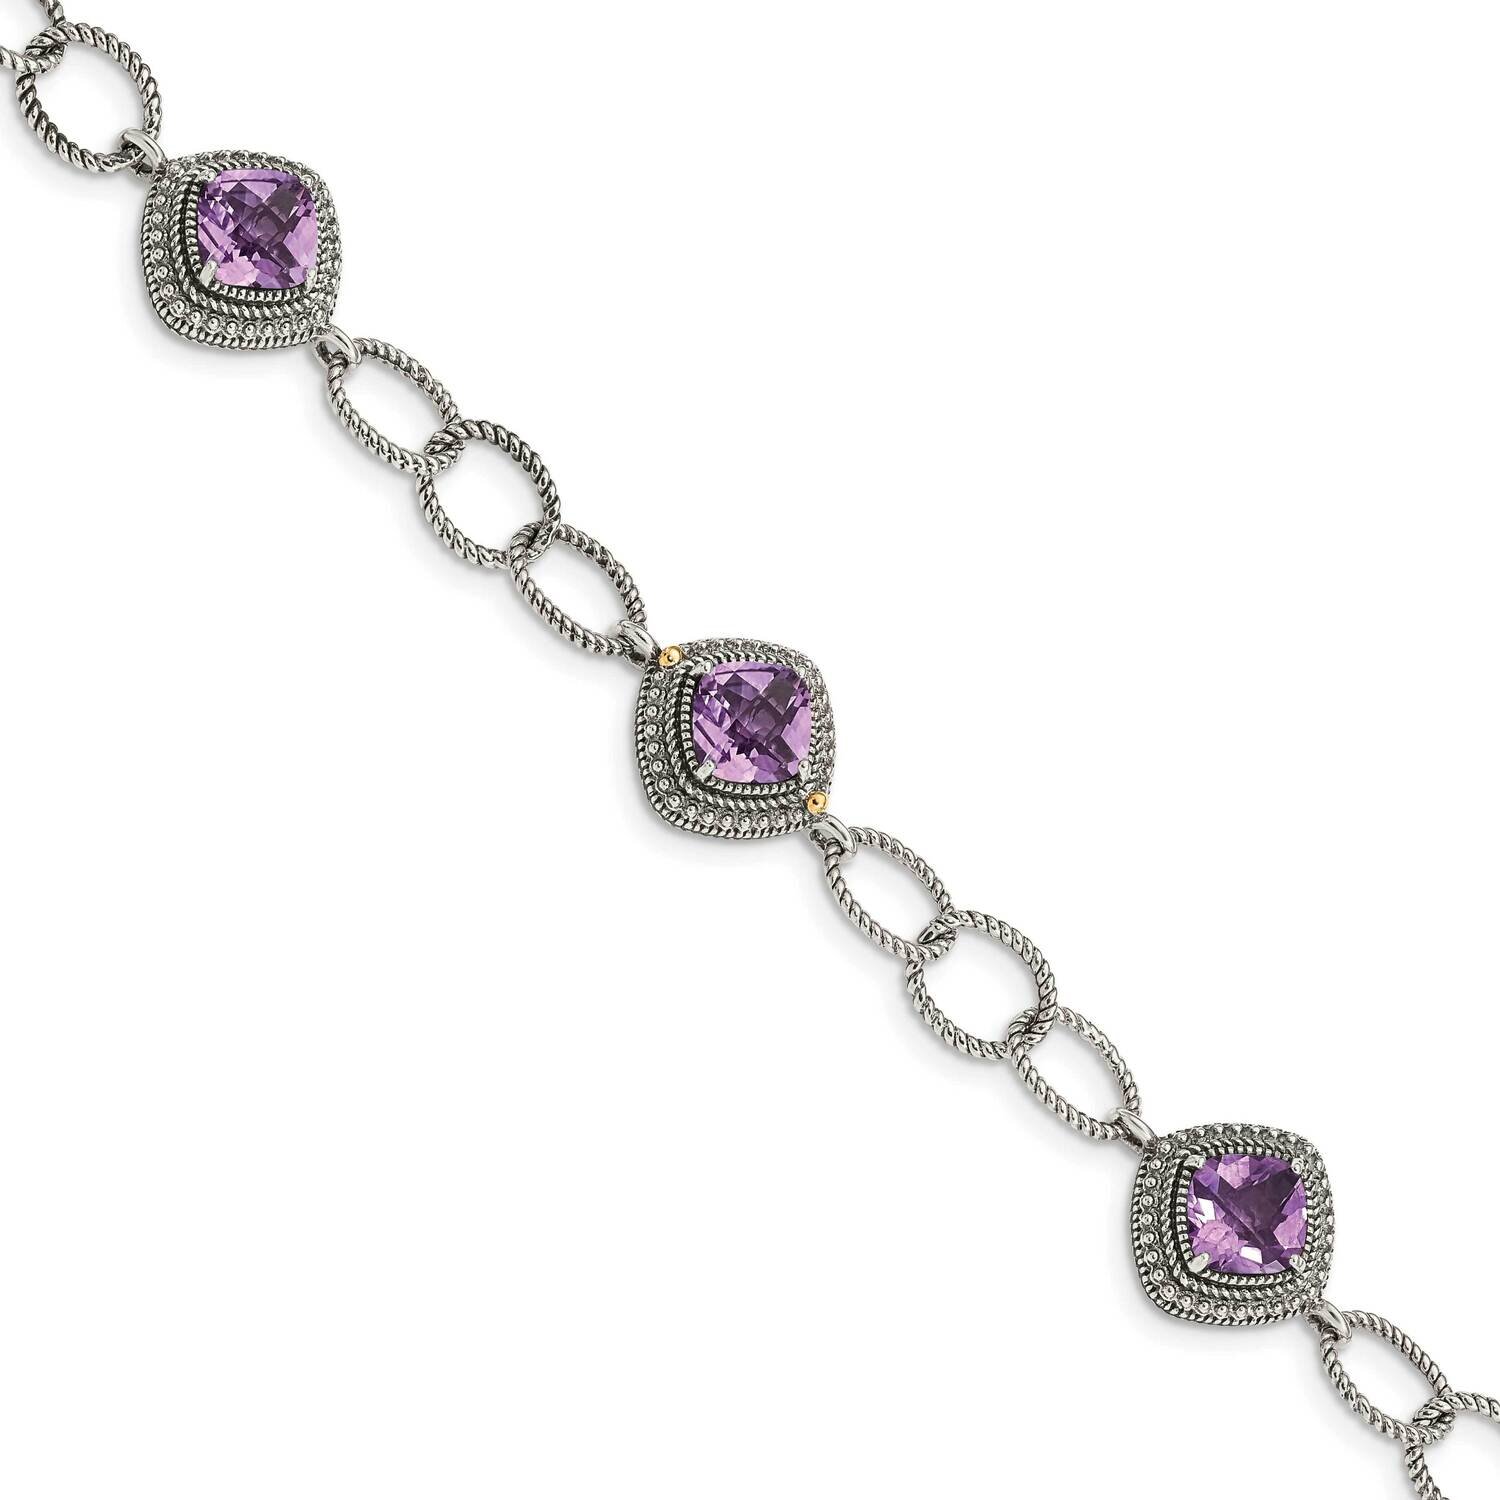 Amethyst 7.5 Inch Bracelet Sterling Silver with 14k Gold Accent QTC1553